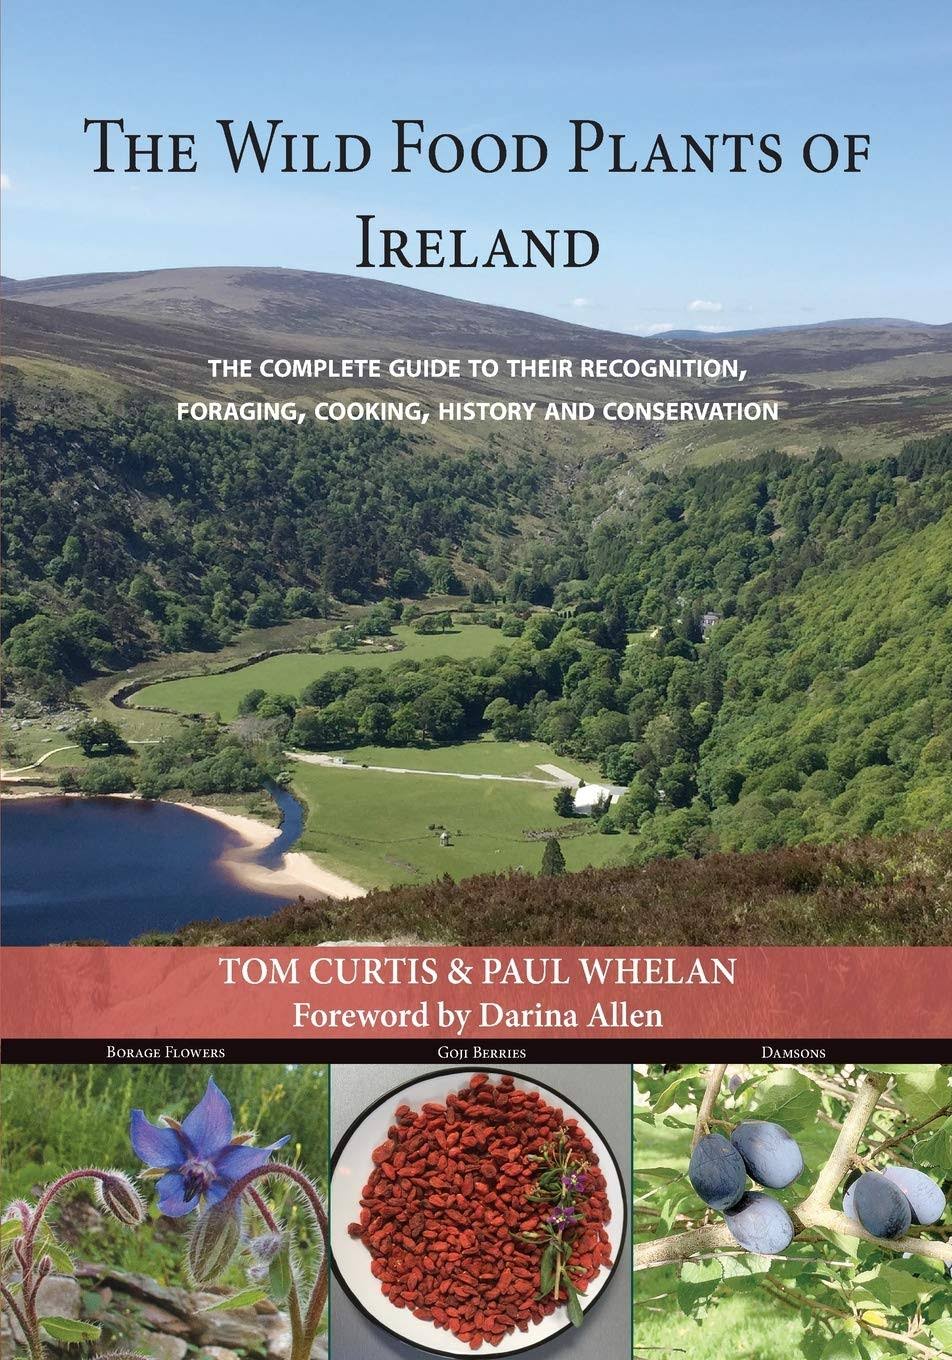 The Wild Food Plants of Ireland: The Complete Guide to Their Recognition, Foraging, Cooking, History and Conservation [Book]